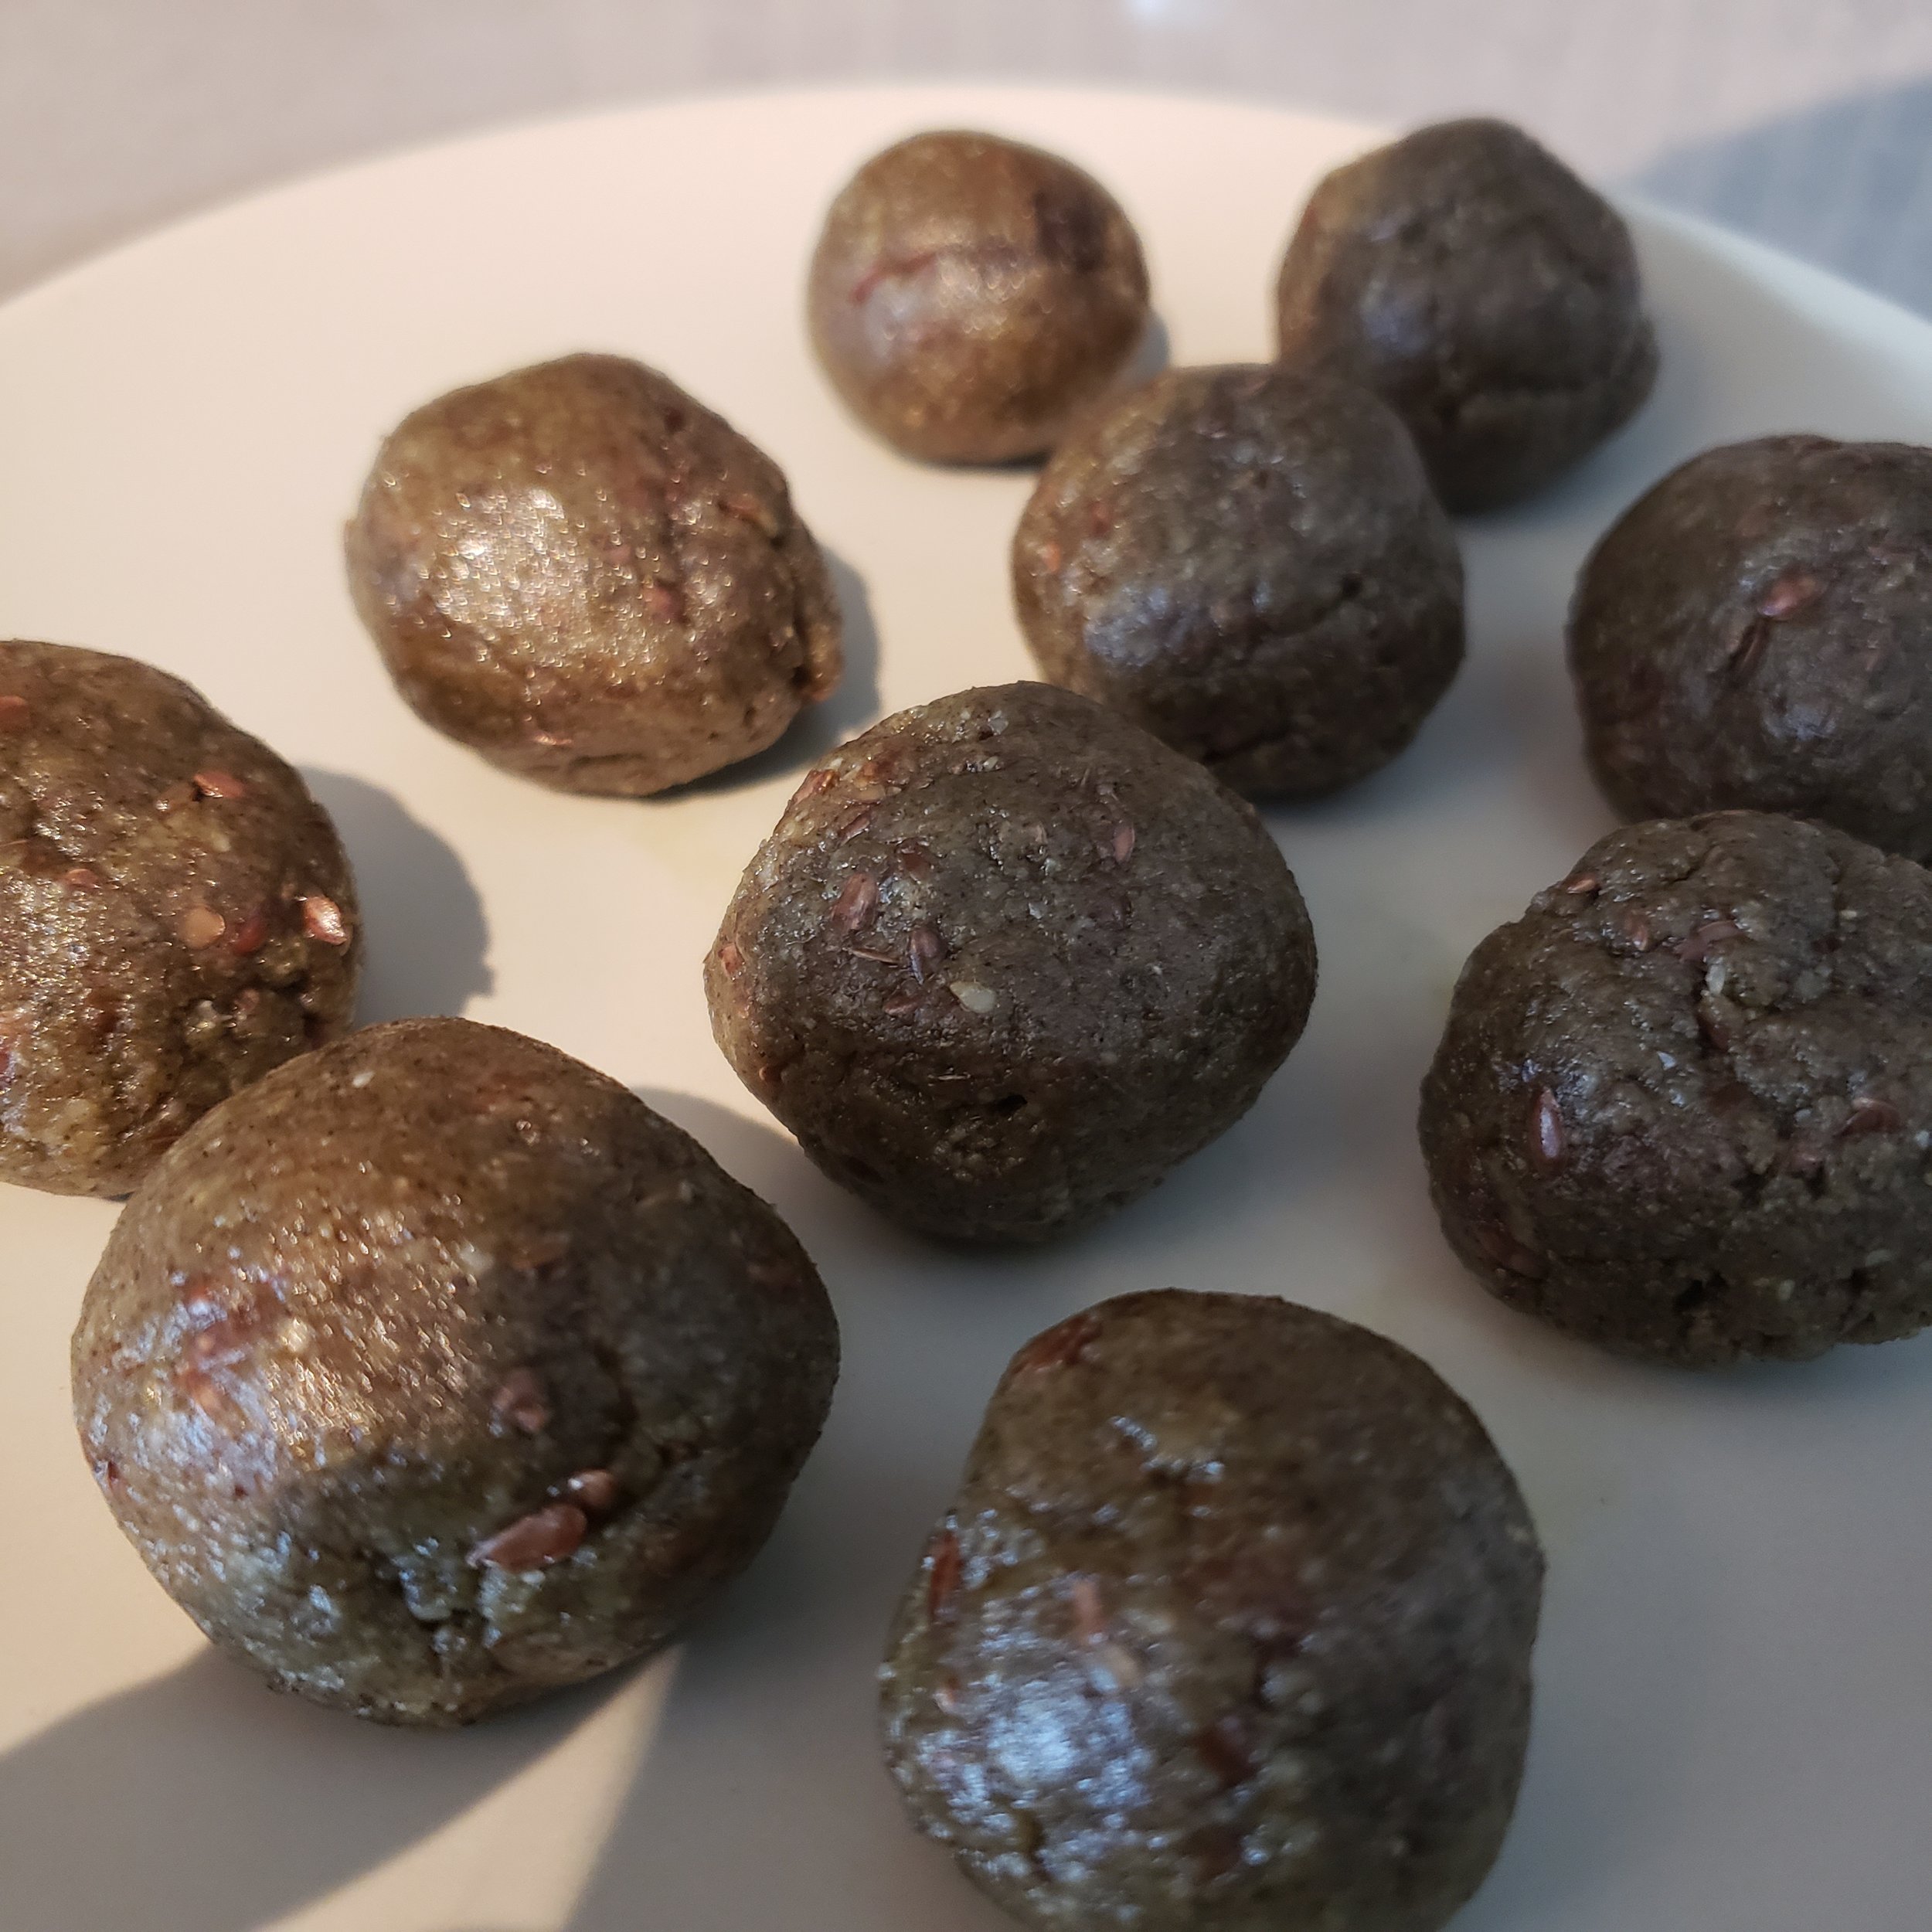 Balls from the freezer before rolling into the coconut